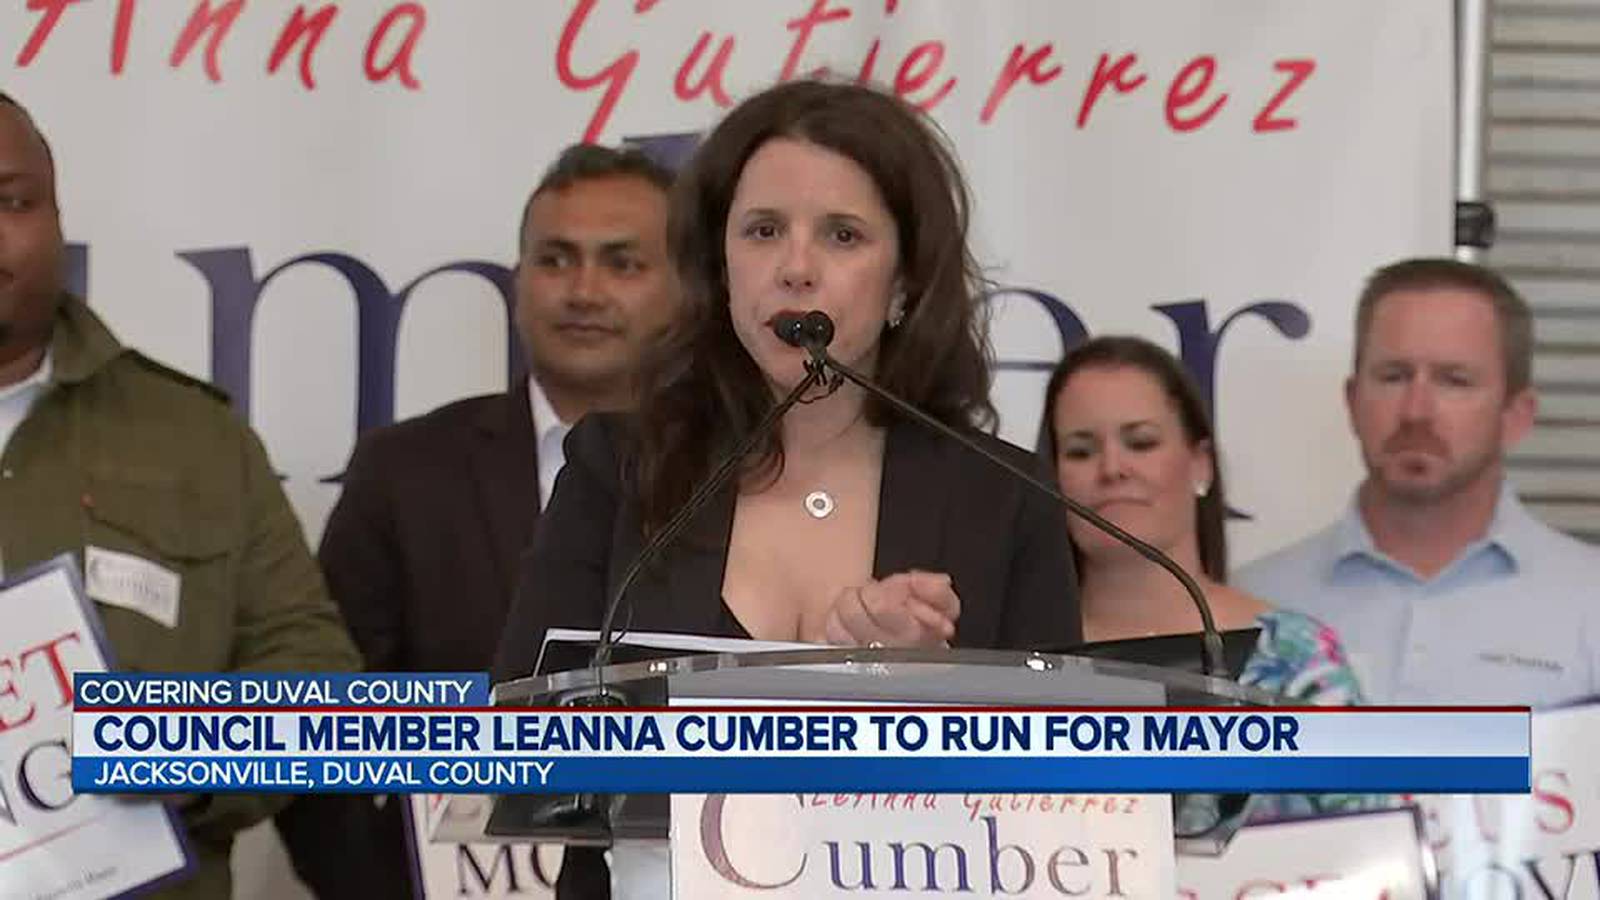 LeAnna Cumber officially files paperwork to run for Jacksonville’s